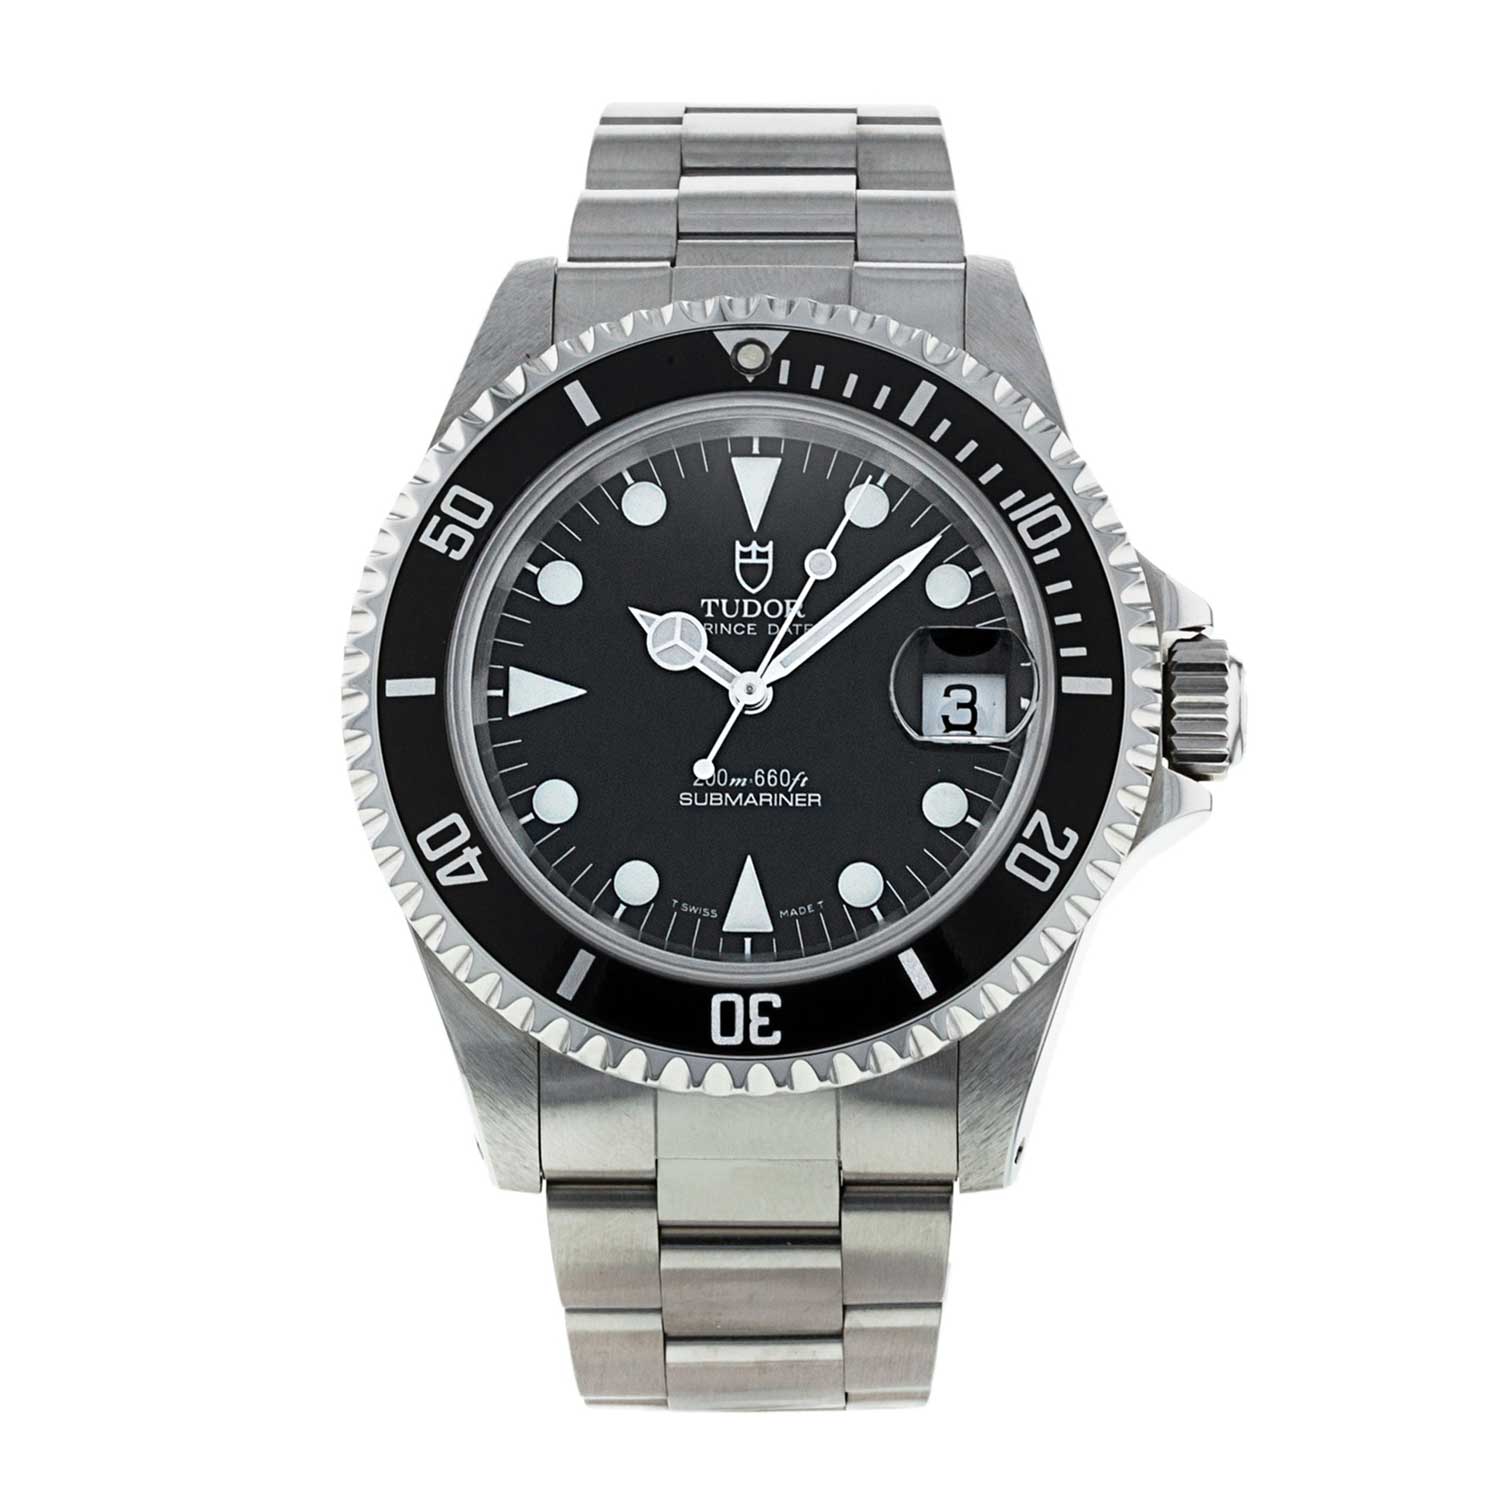 The present example of the Tudor Submariner 79190 in our shop is from 1997 and it comes with its original box.